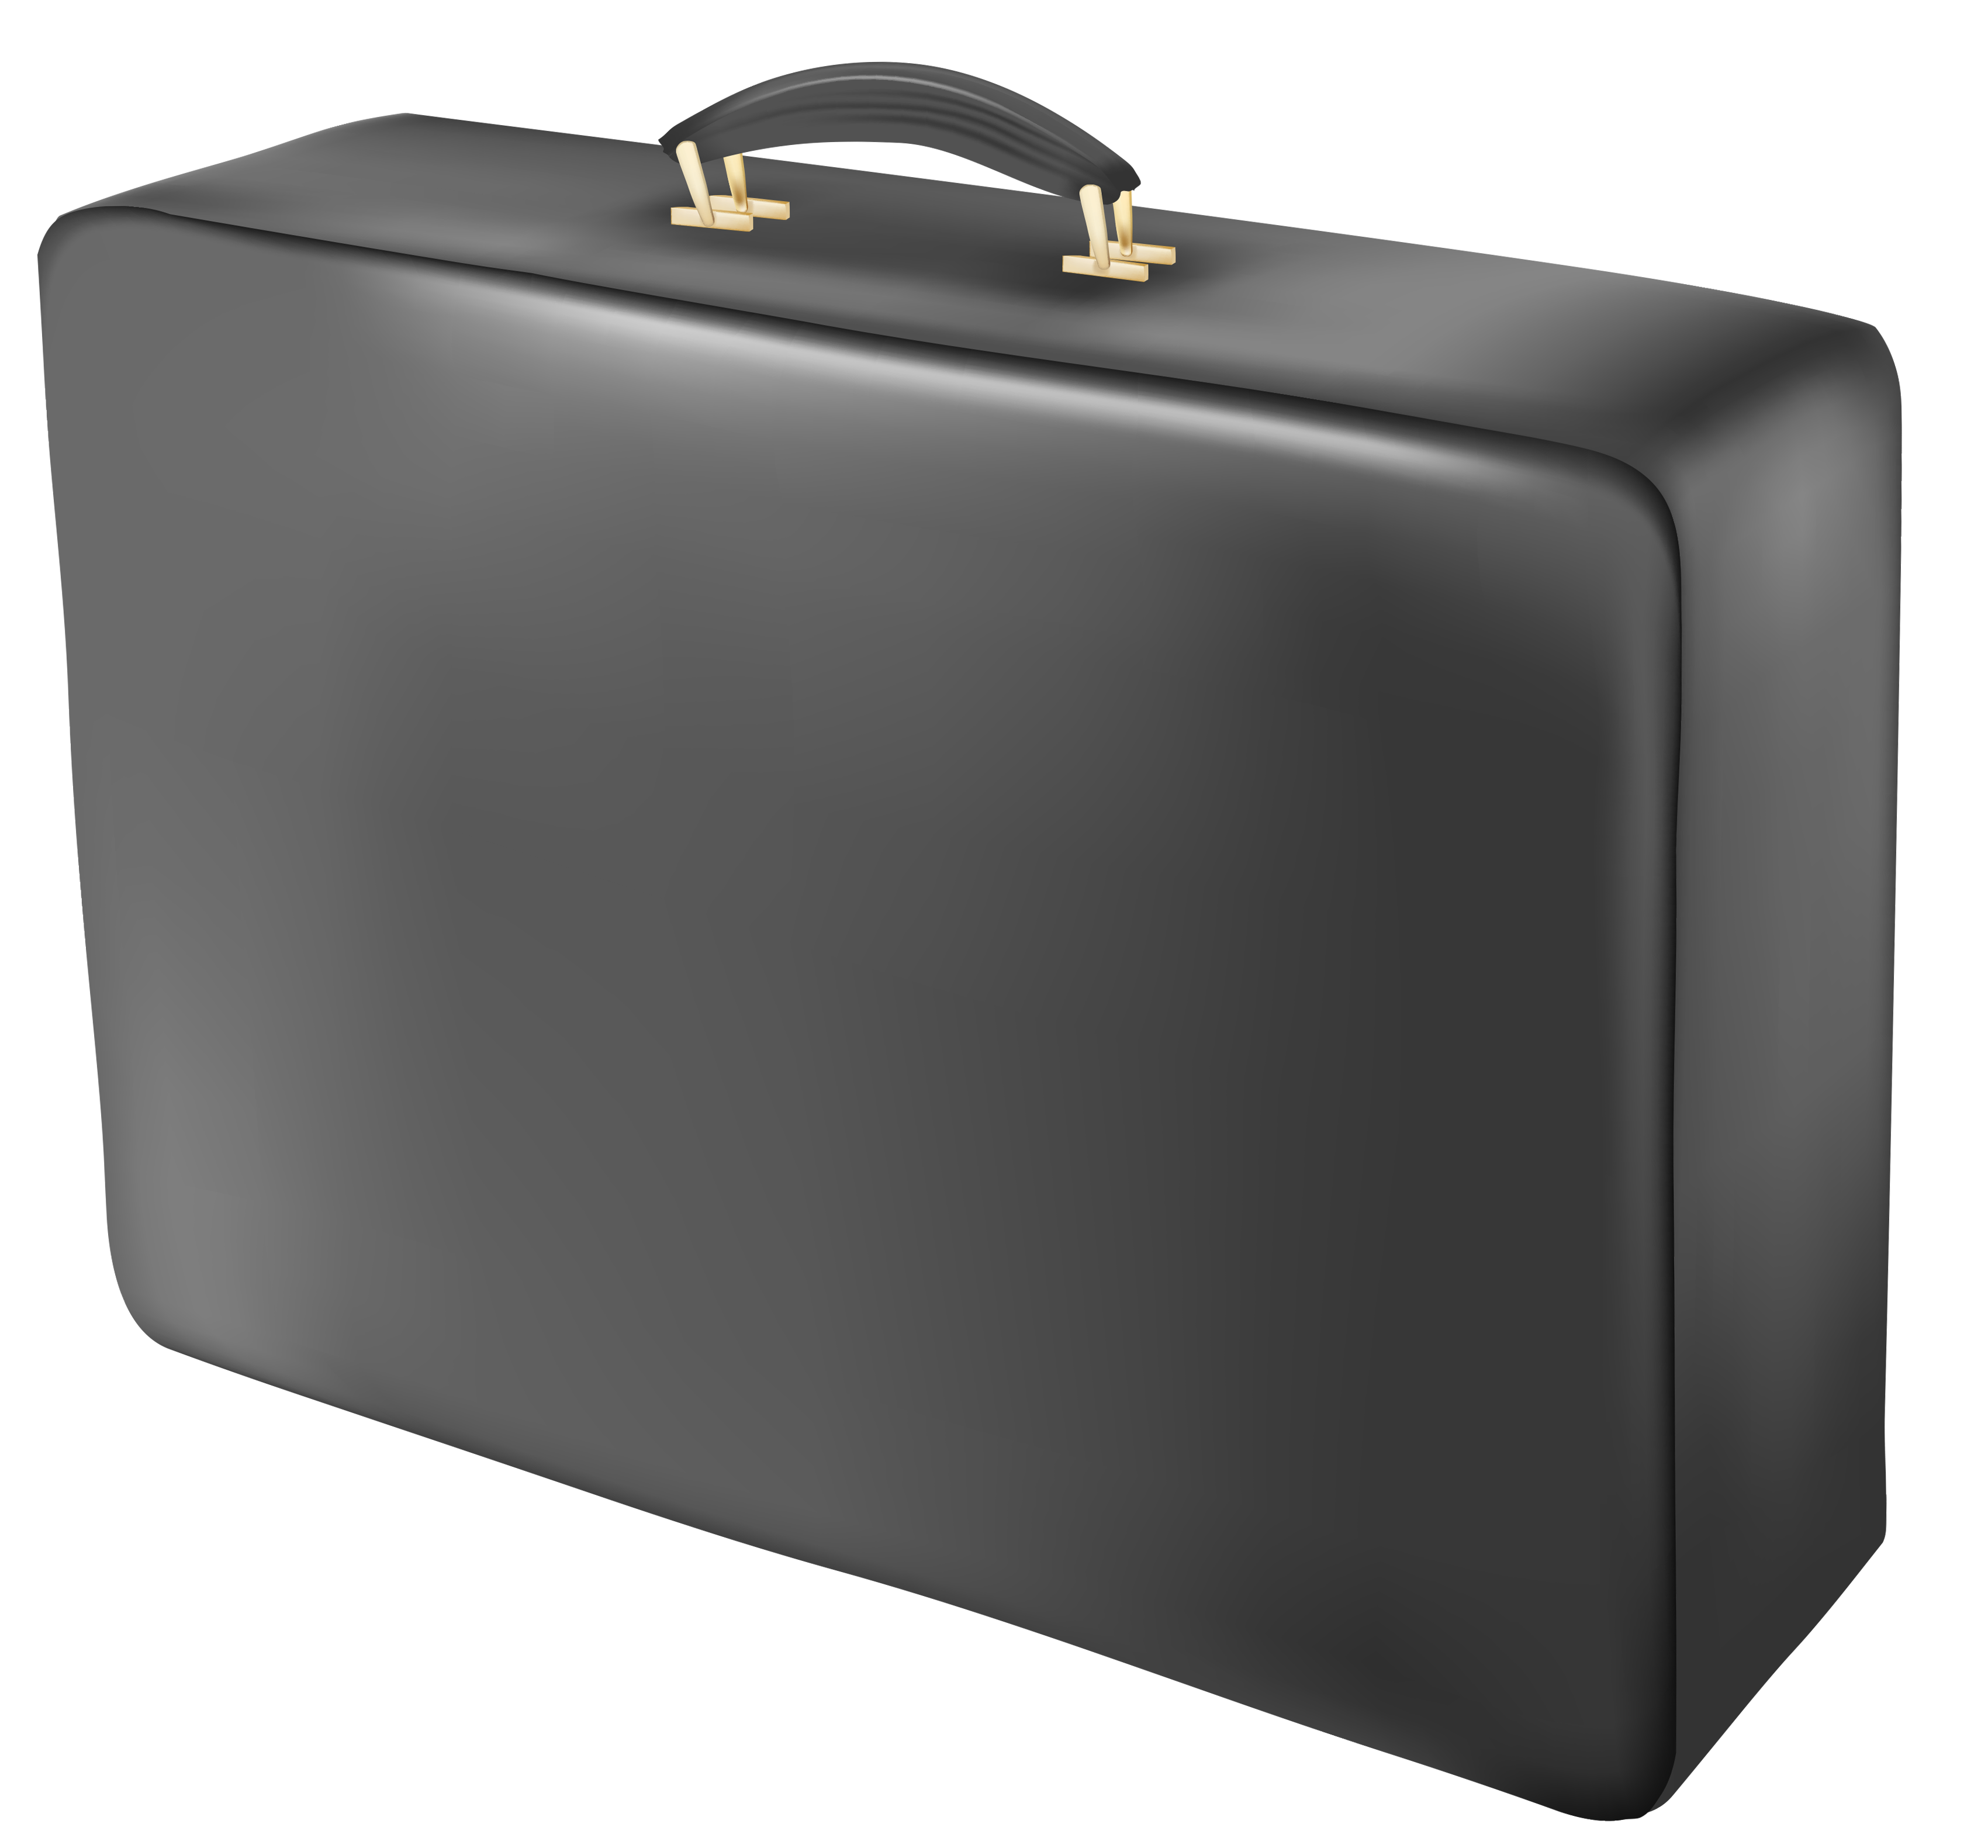 Suitcase Png Image   Suitcase Hd Png - Briefcase, Transparent background PNG HD thumbnail